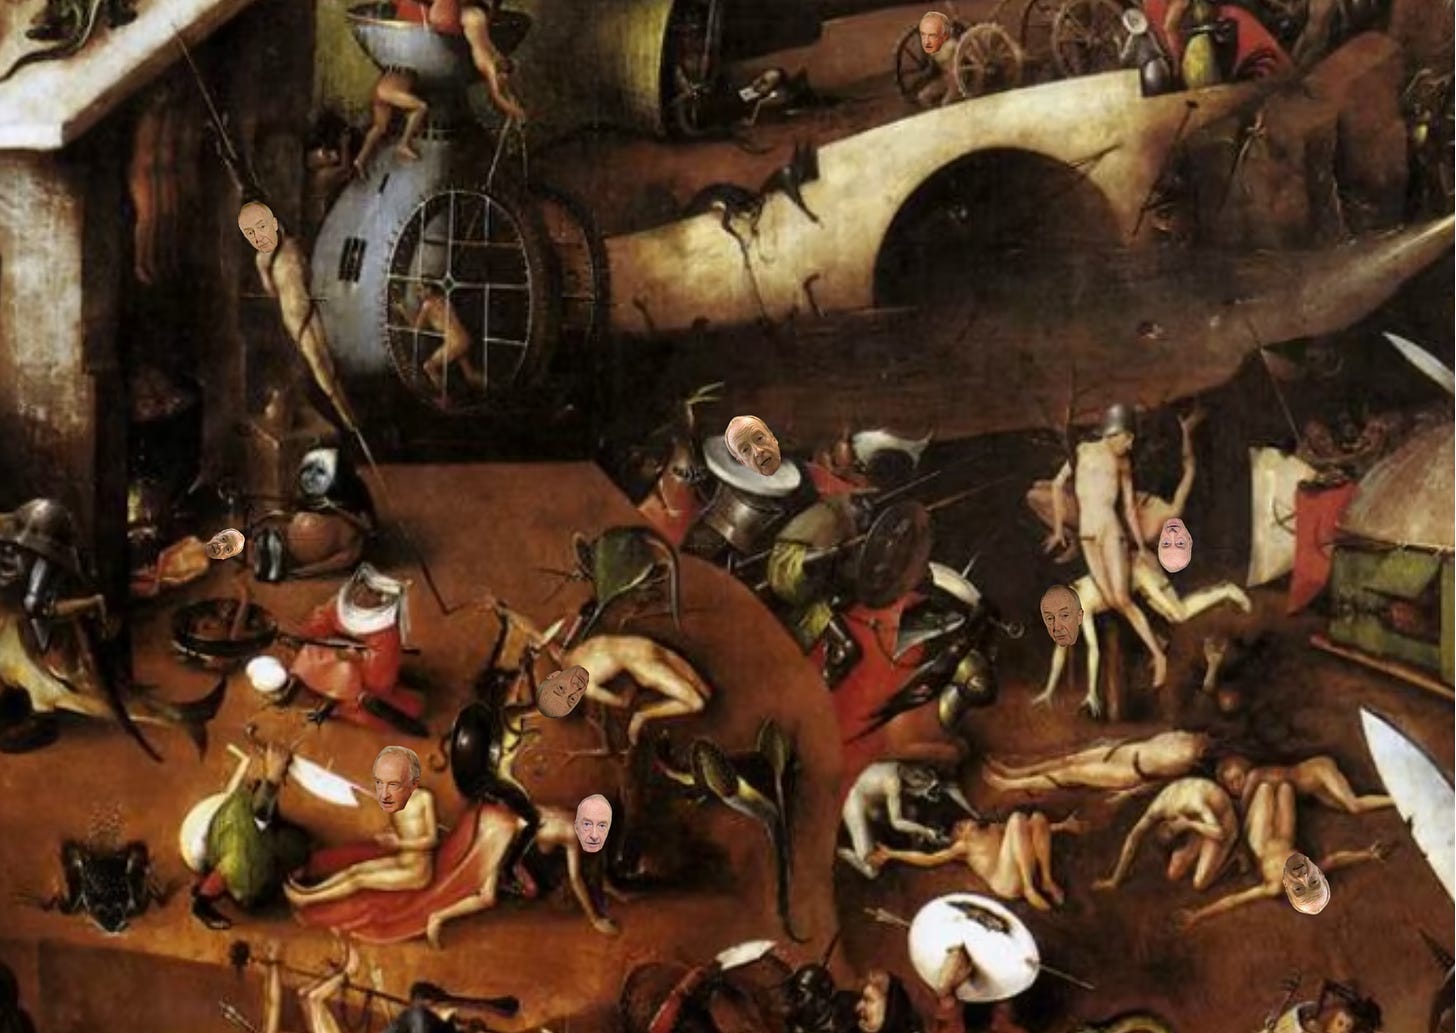 Hieronymous Bosch's vision of Hell but Nicholas Witchell is there, in multiple guises